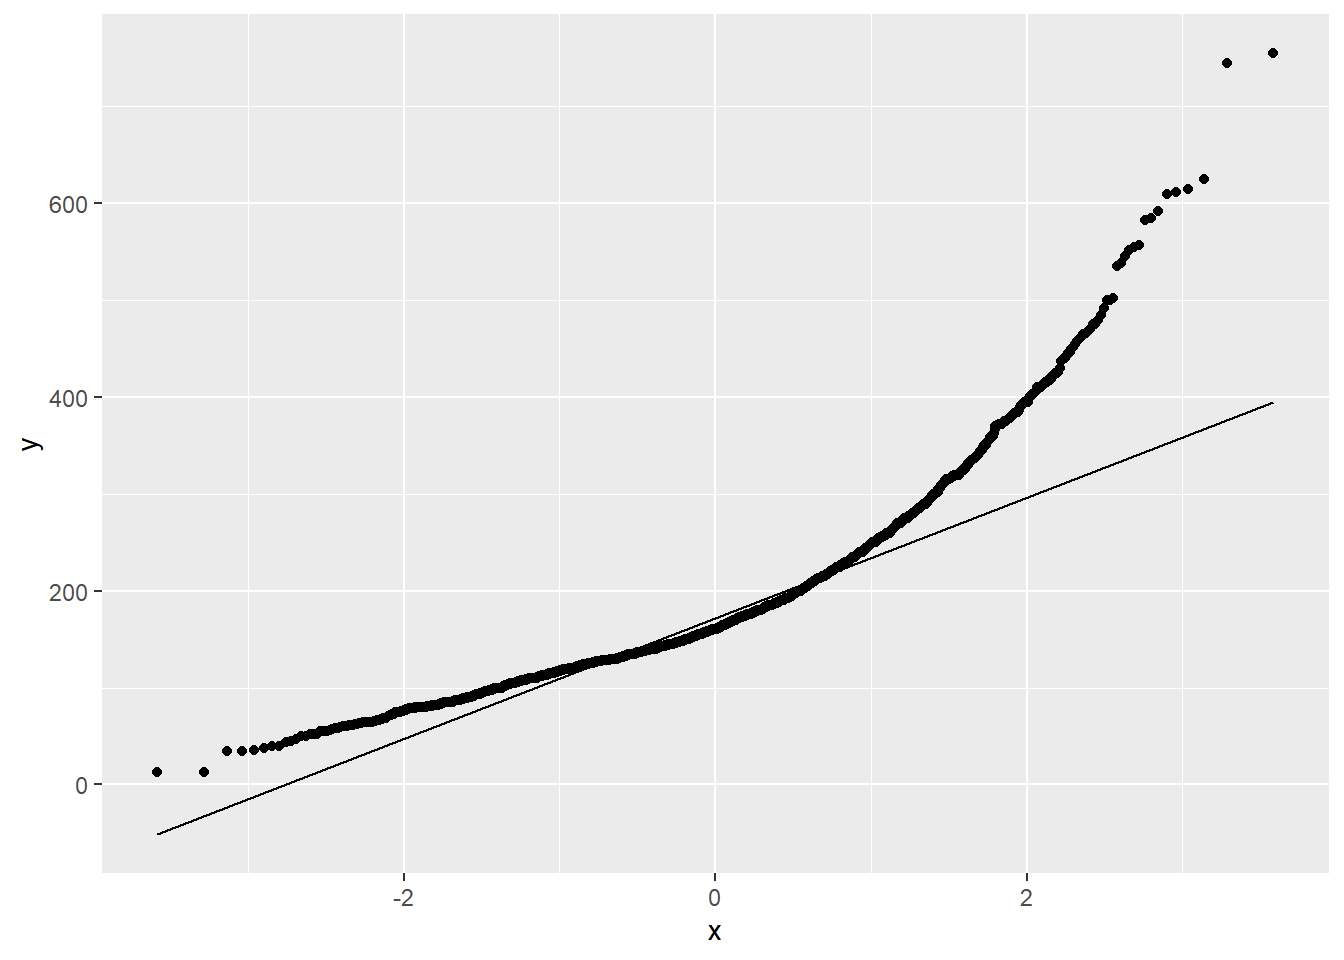 QQ-Plot: Quantiles of Sale_Price vs. quantiles of a theoretical normal distribution with same mean and standard deviation. Conclusion: Sale_Price is _not_ normally distributed due to a problem with skew.